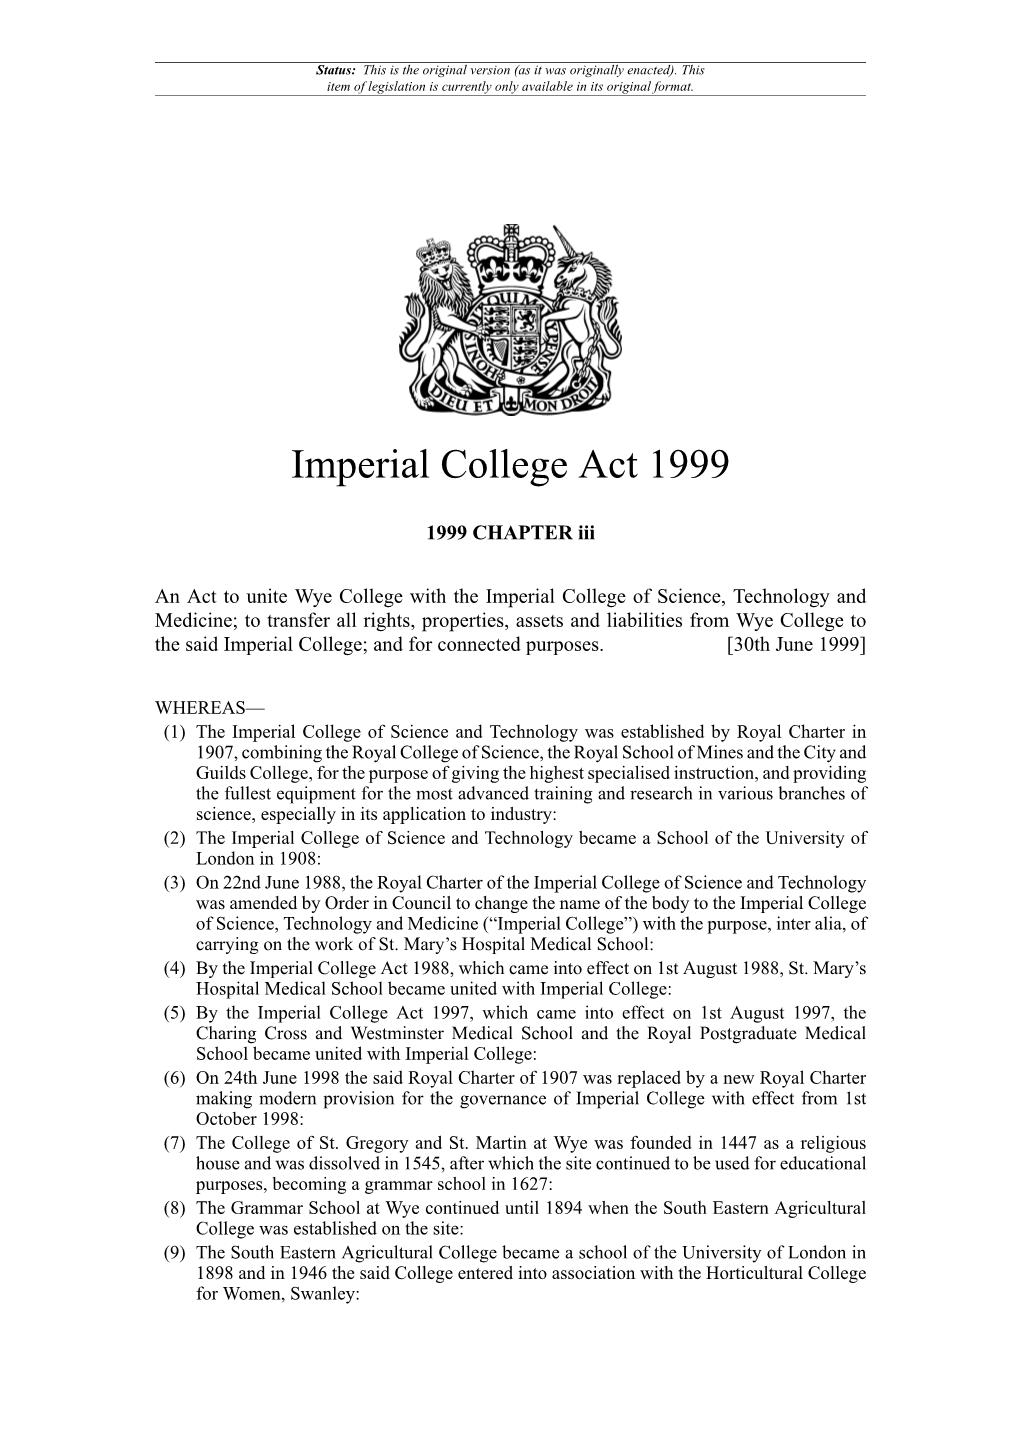 Imperial College Act 1999